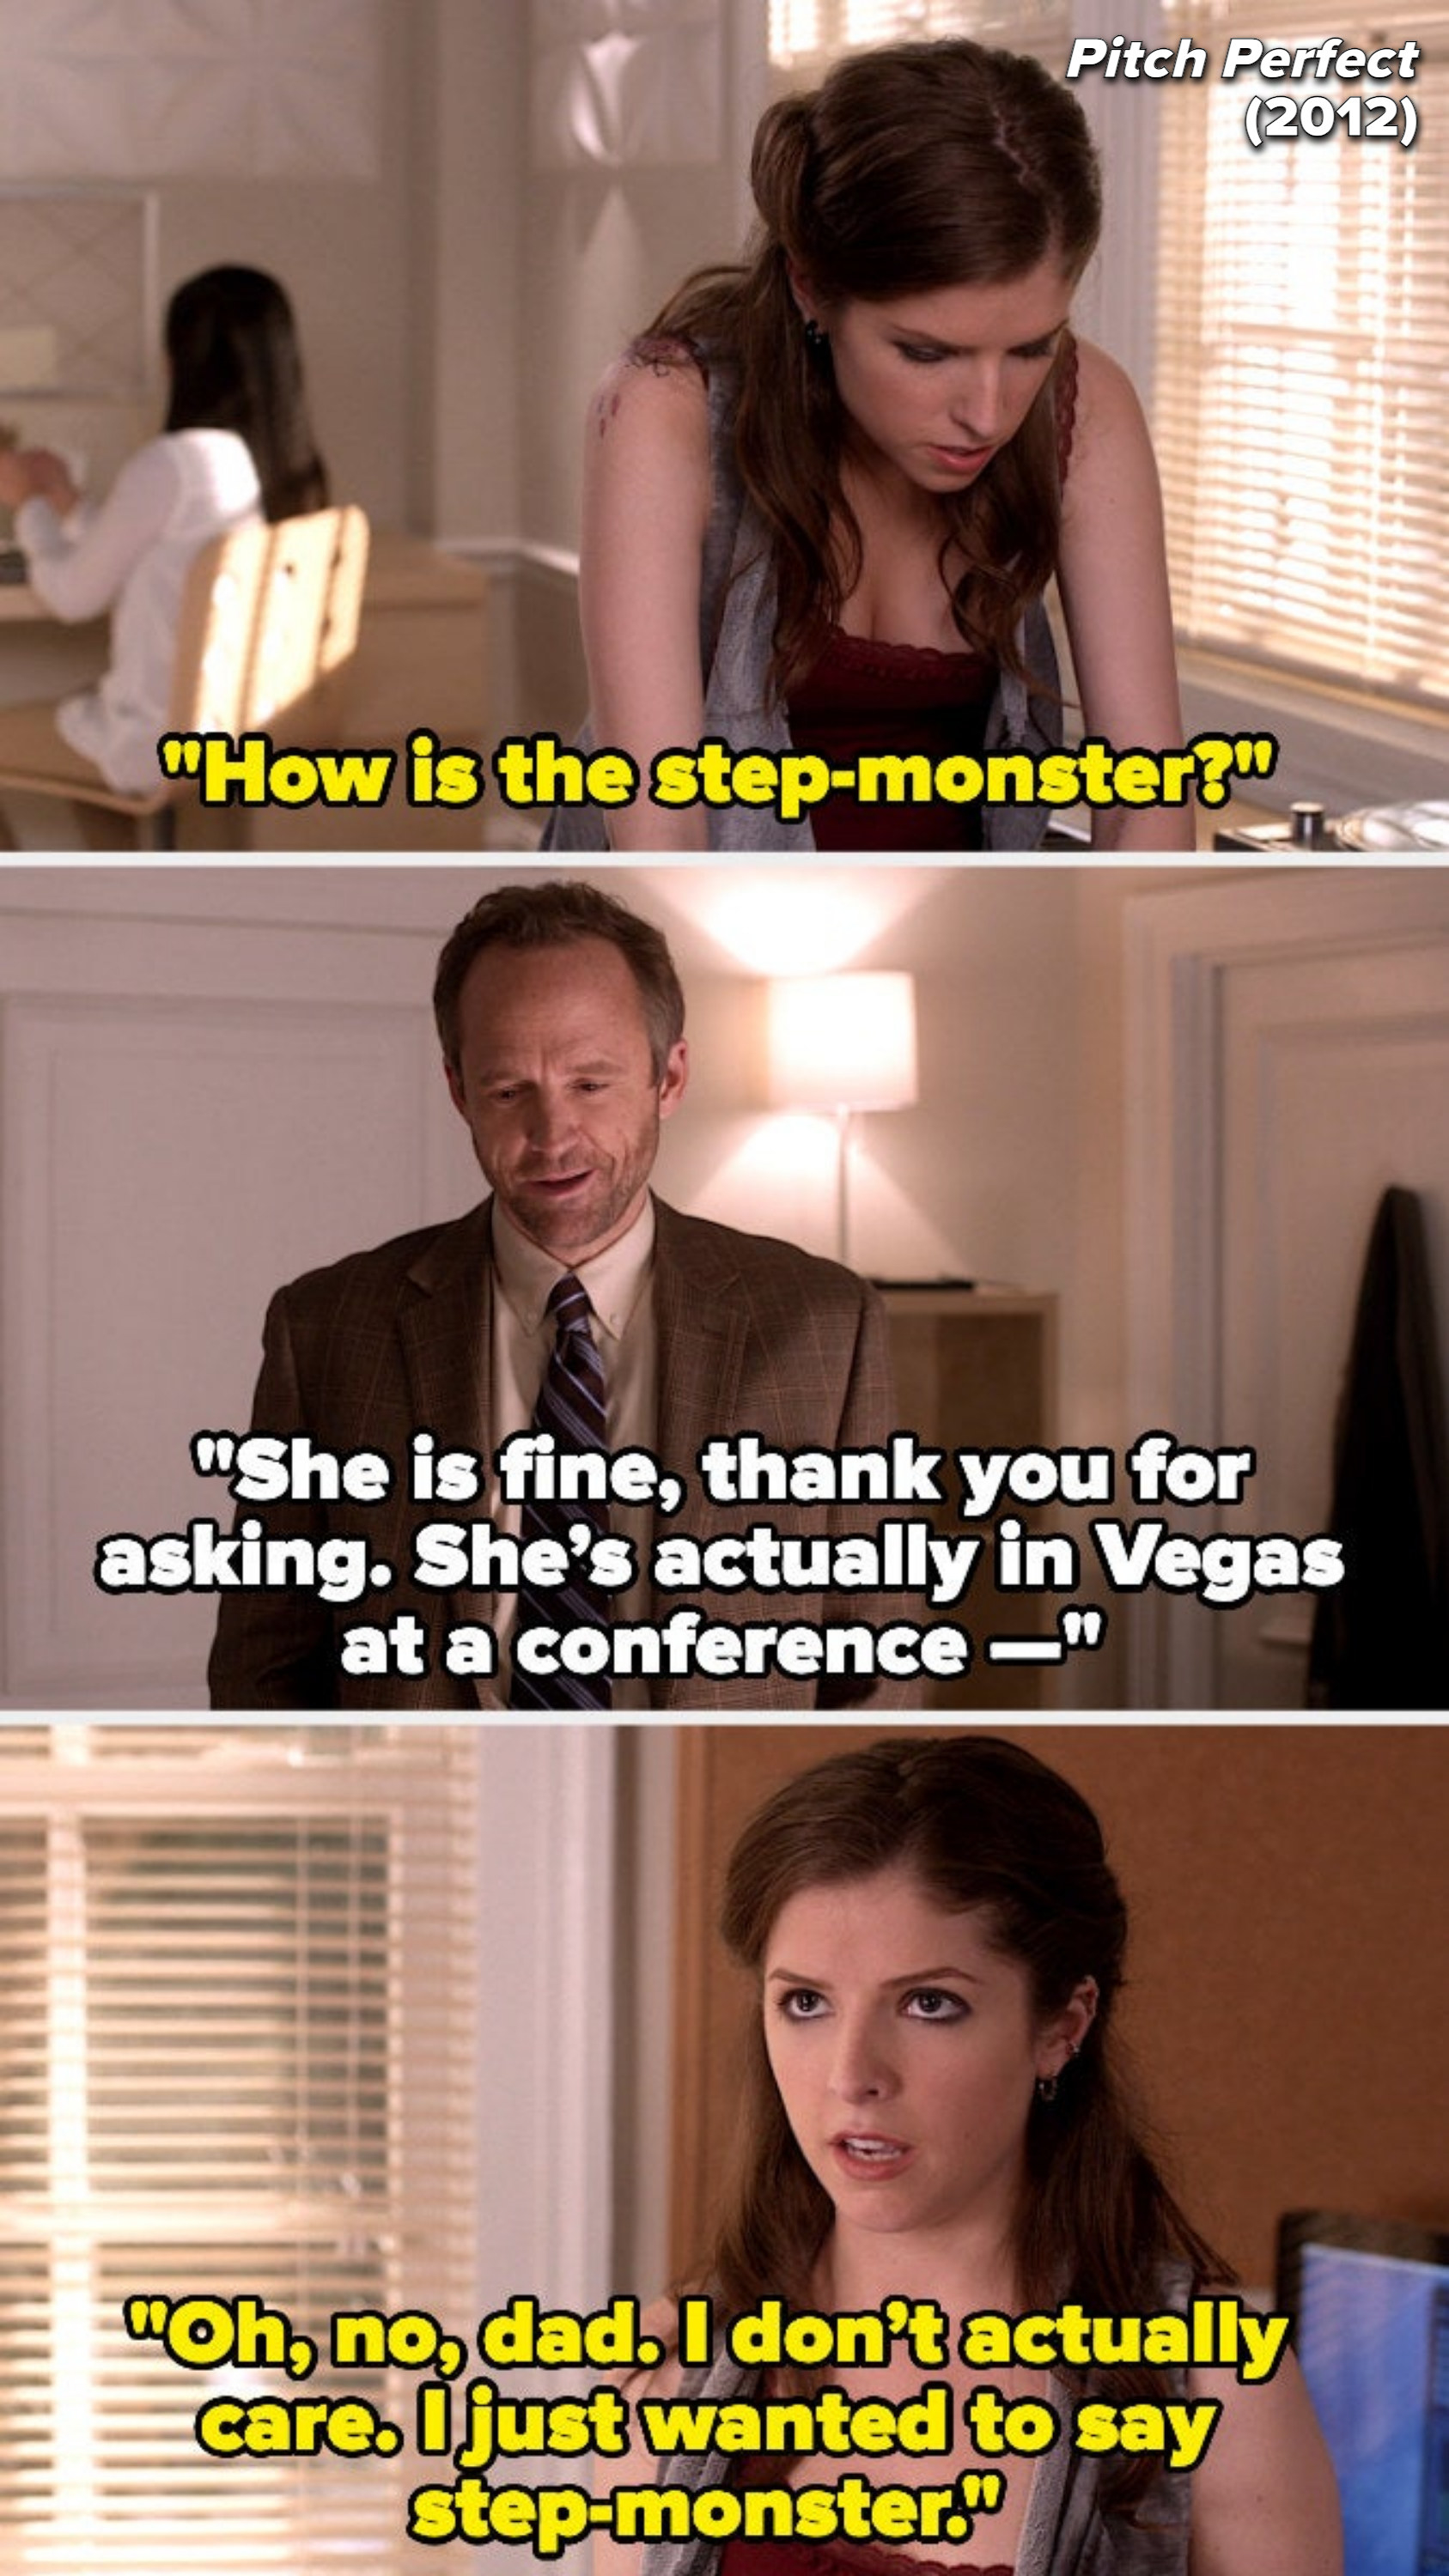 daughter: how is the step-monster? dad; she is fine thank you for asking she&#x27;s actually in vegas at a conference. daughter: oh no dad i don&#x27;t actually care i just wanted to say step-monster